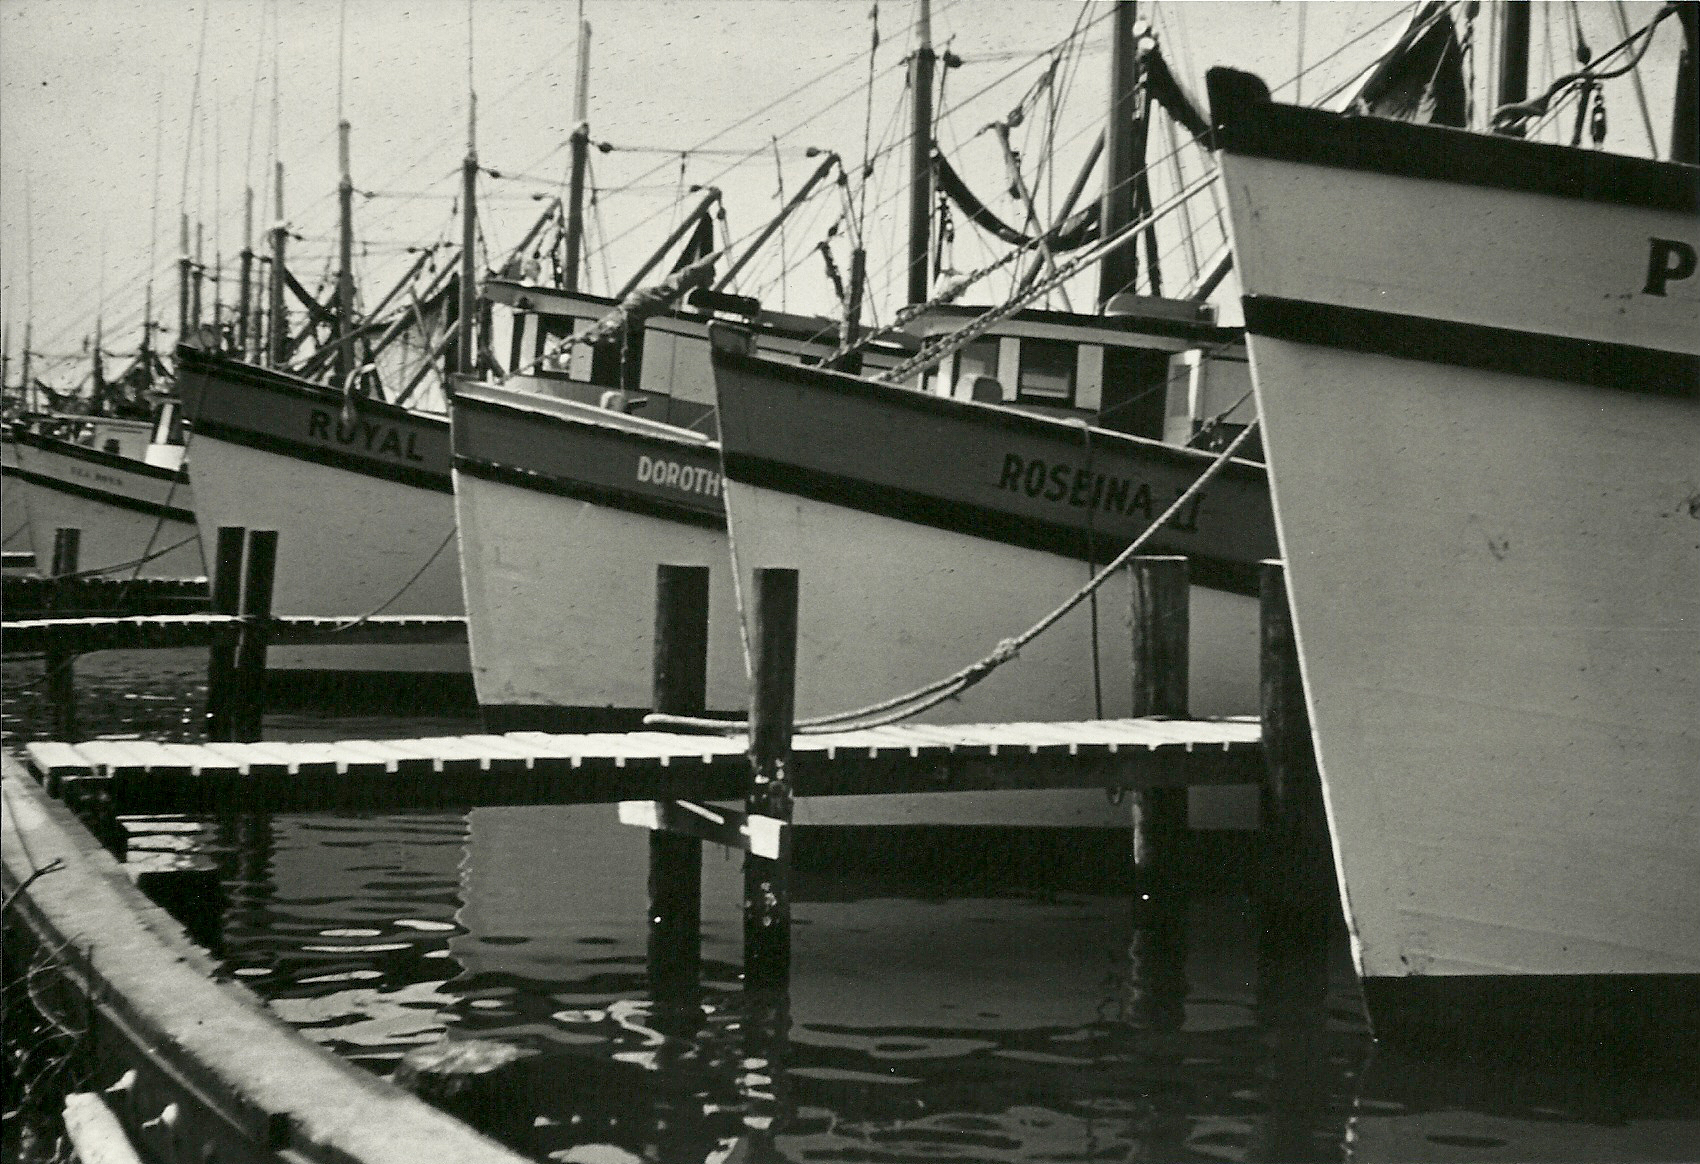 The hulls of 5 shrimp trawlers docked in the Southport Yacht Basin in the early 1950s